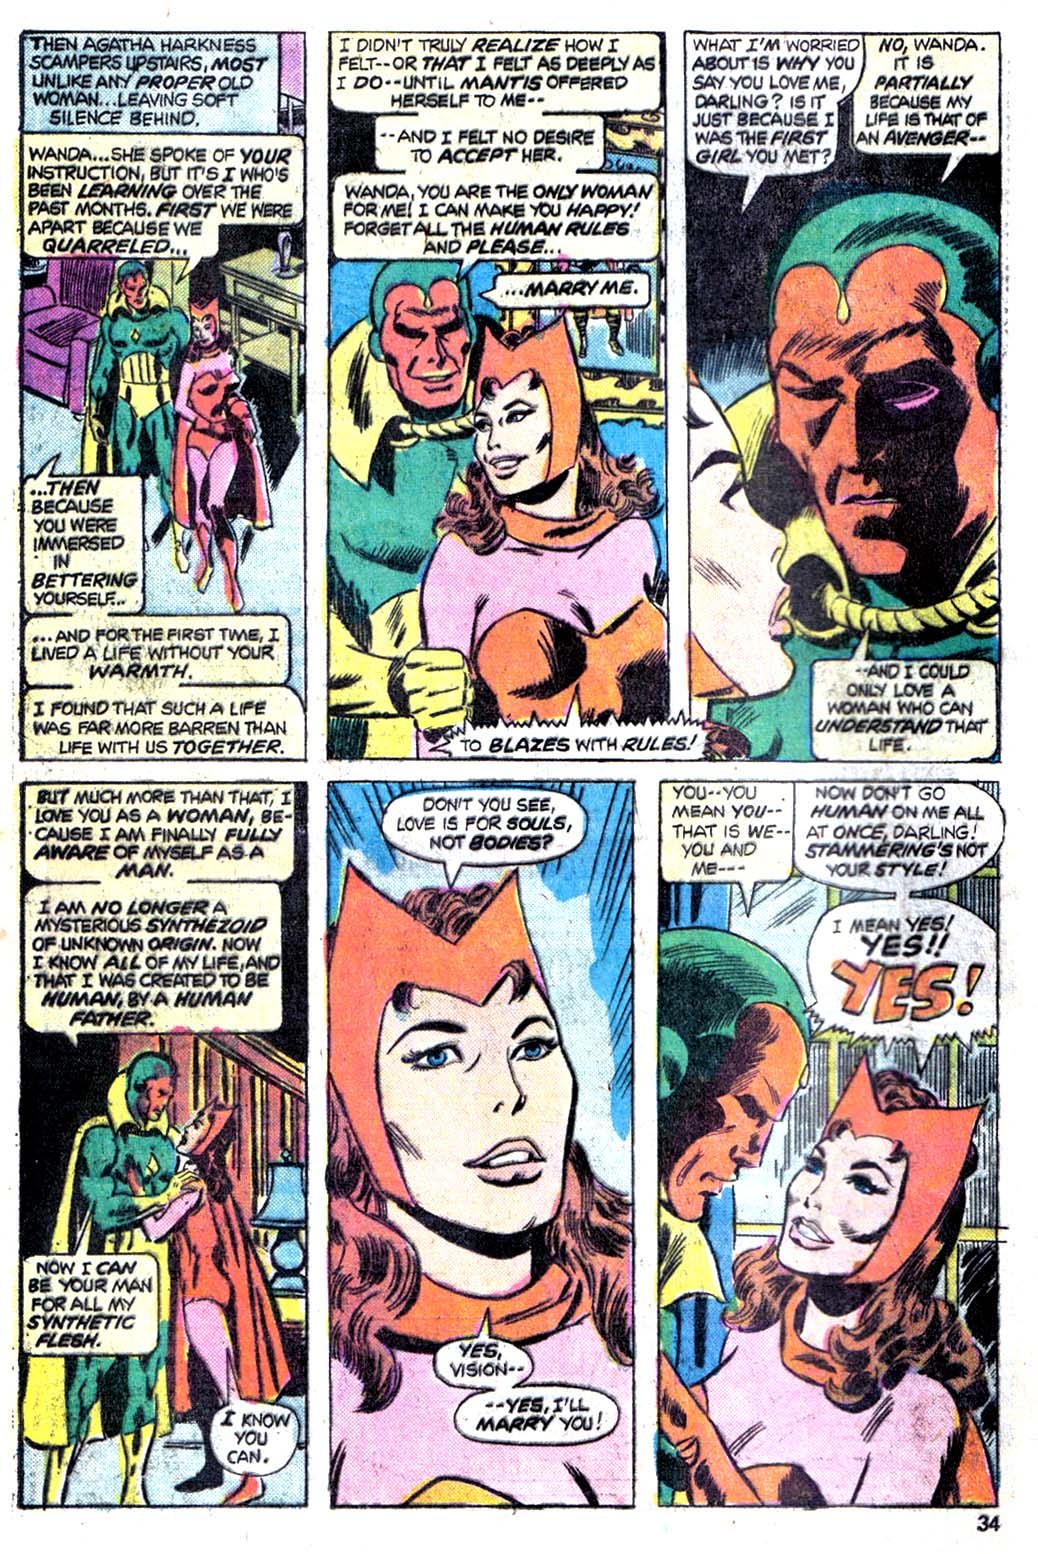 Vision proposes to Scarlet Witch